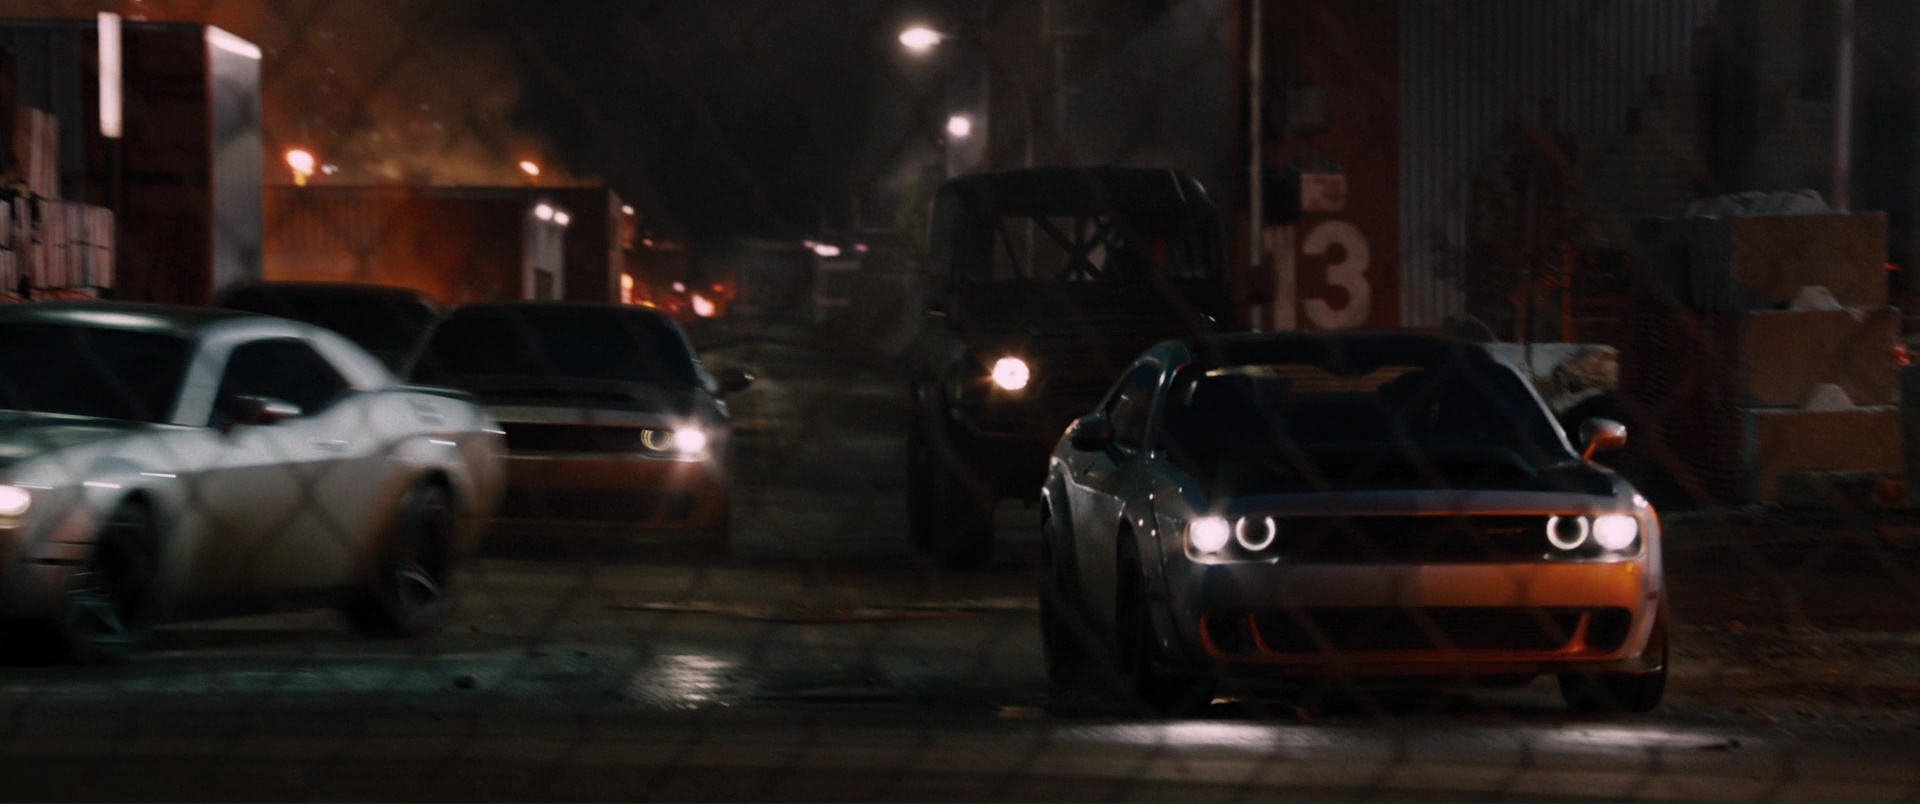 Dodge Challenger Cars in The Fate of the Furious (2017) Movie